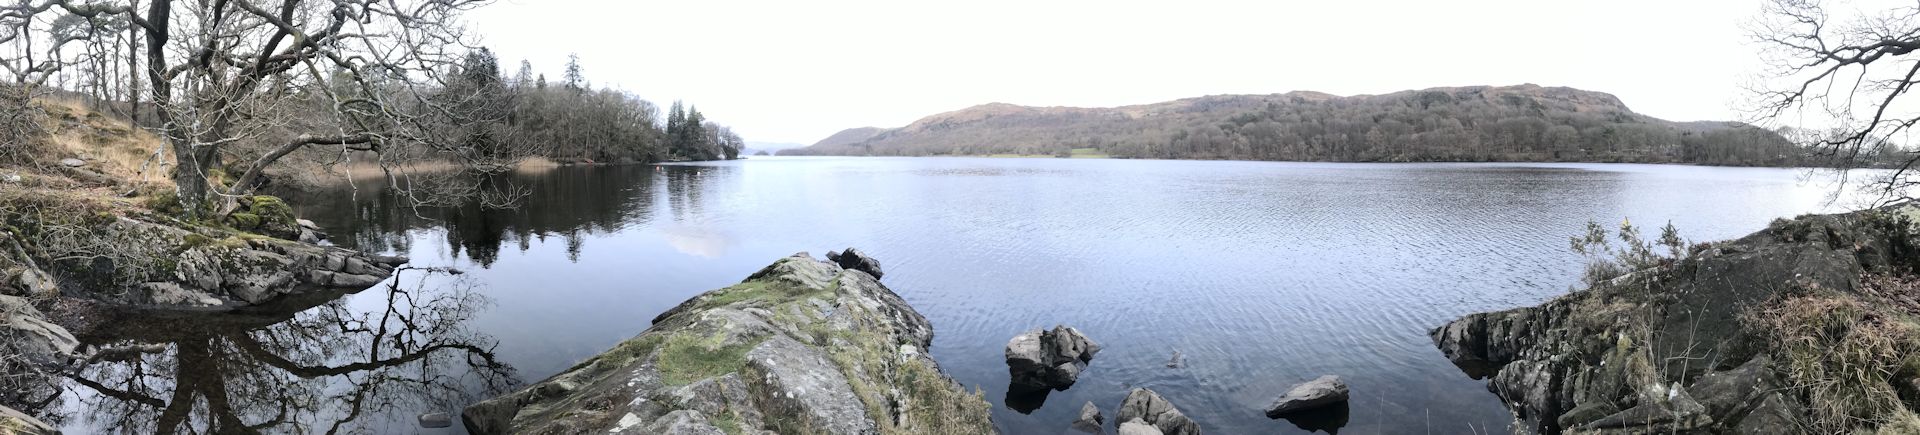 Coniston Water with Wildcat Island